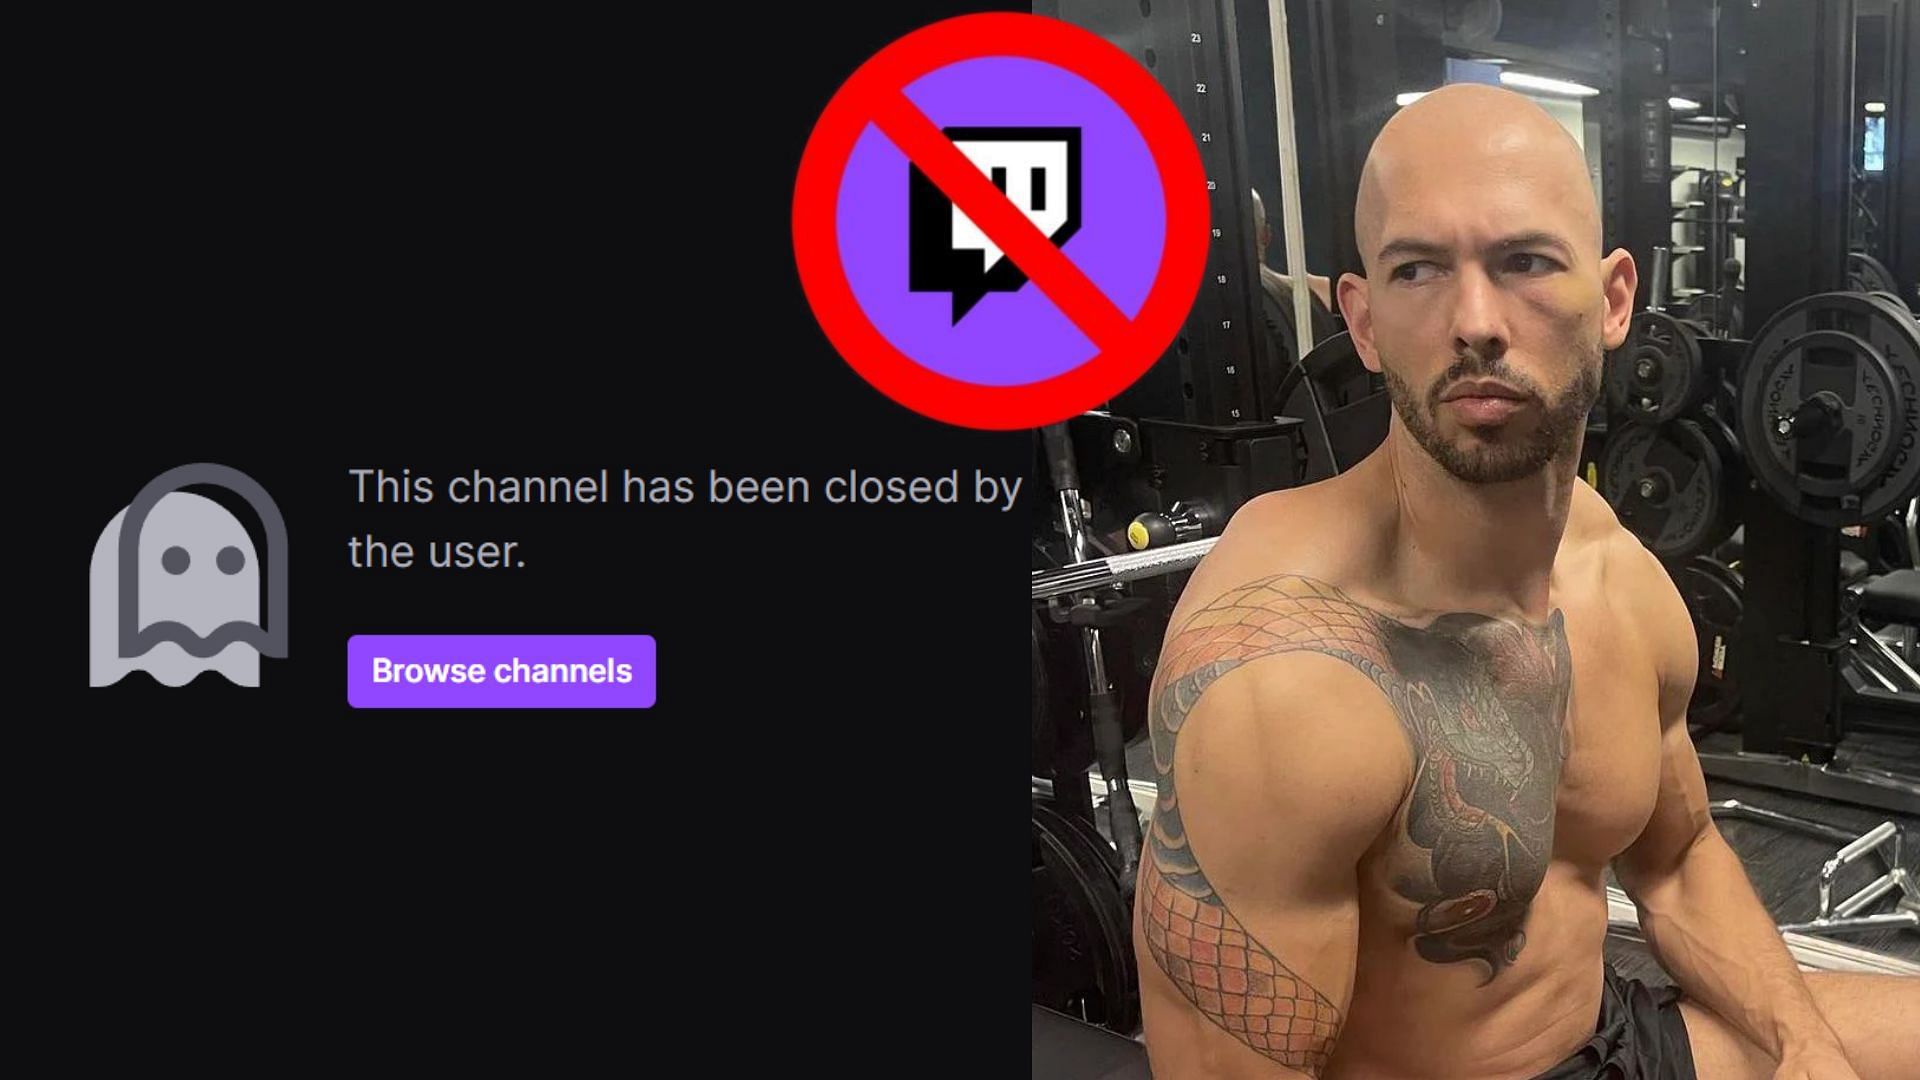 Andrew Tate deletes Twitch channel "tatespeech" after YouTube and